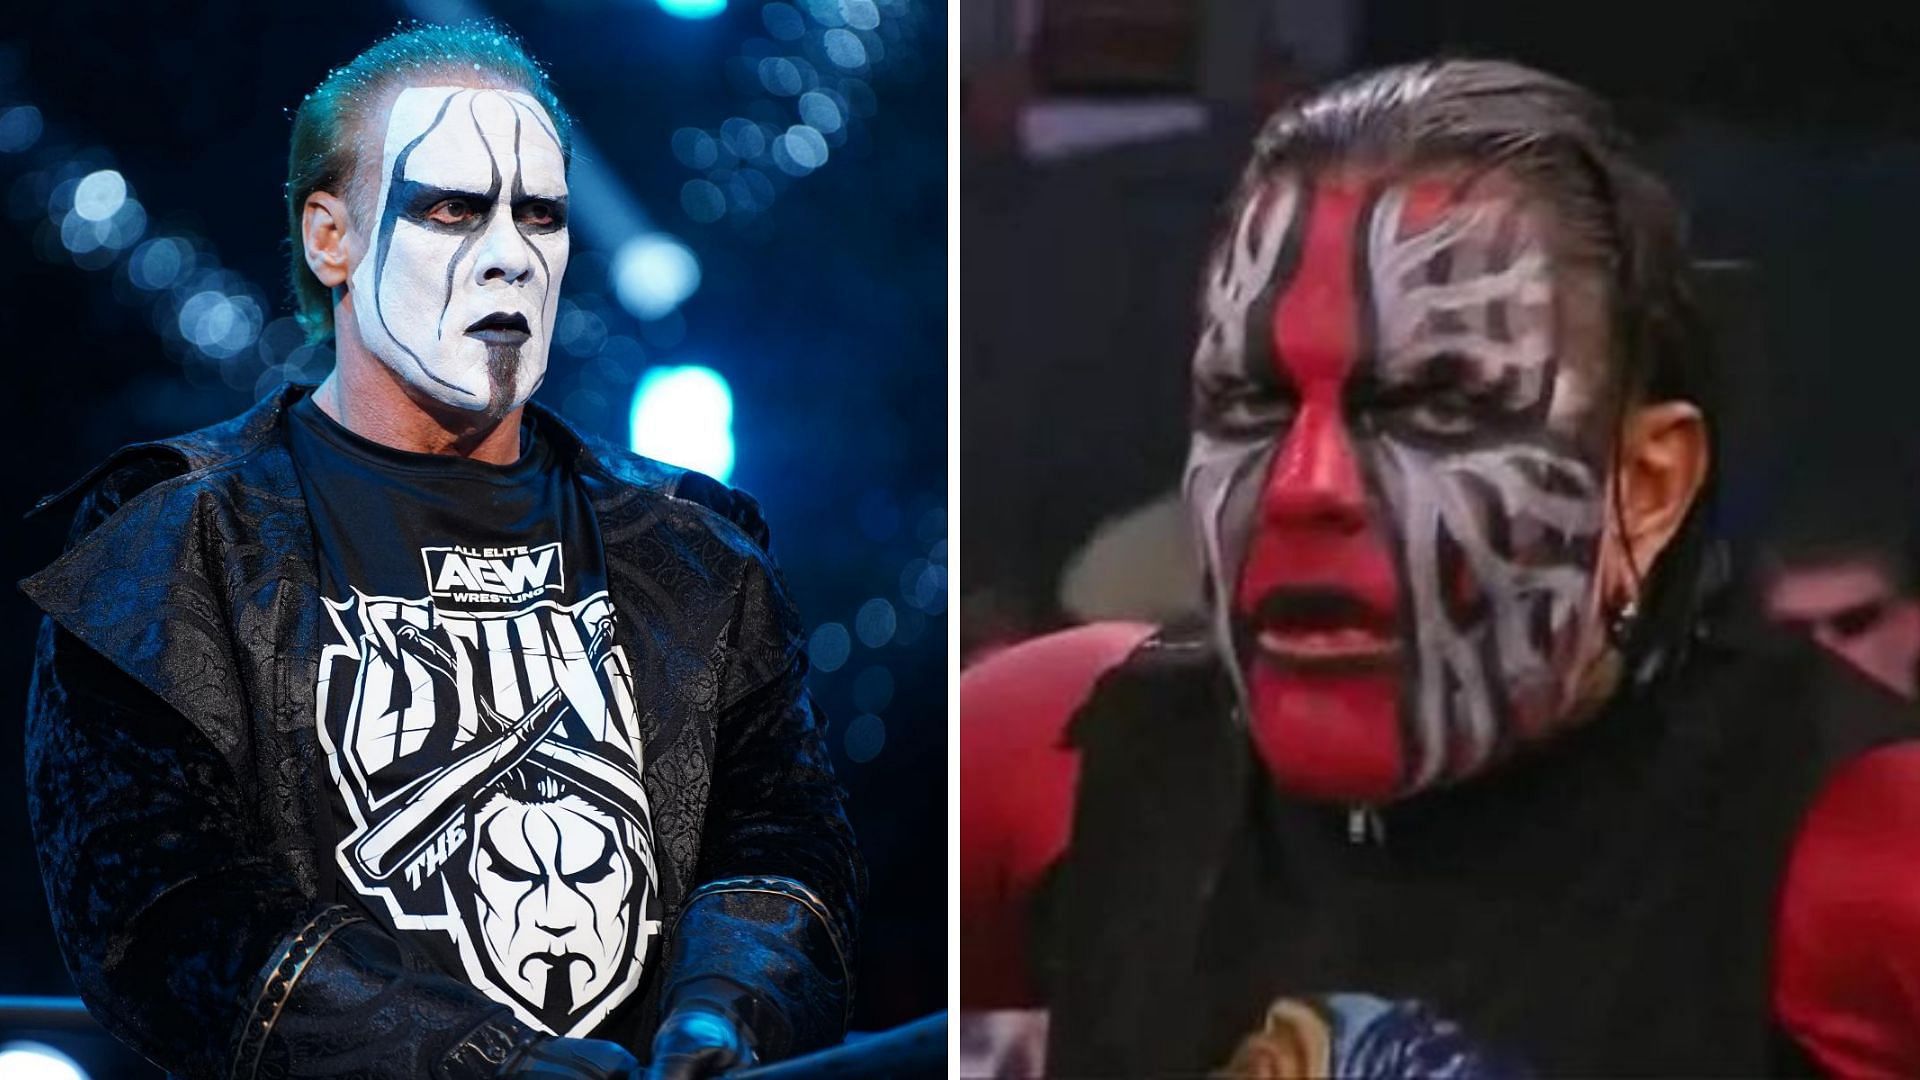 Sting (left), Jeff Hardy (right)